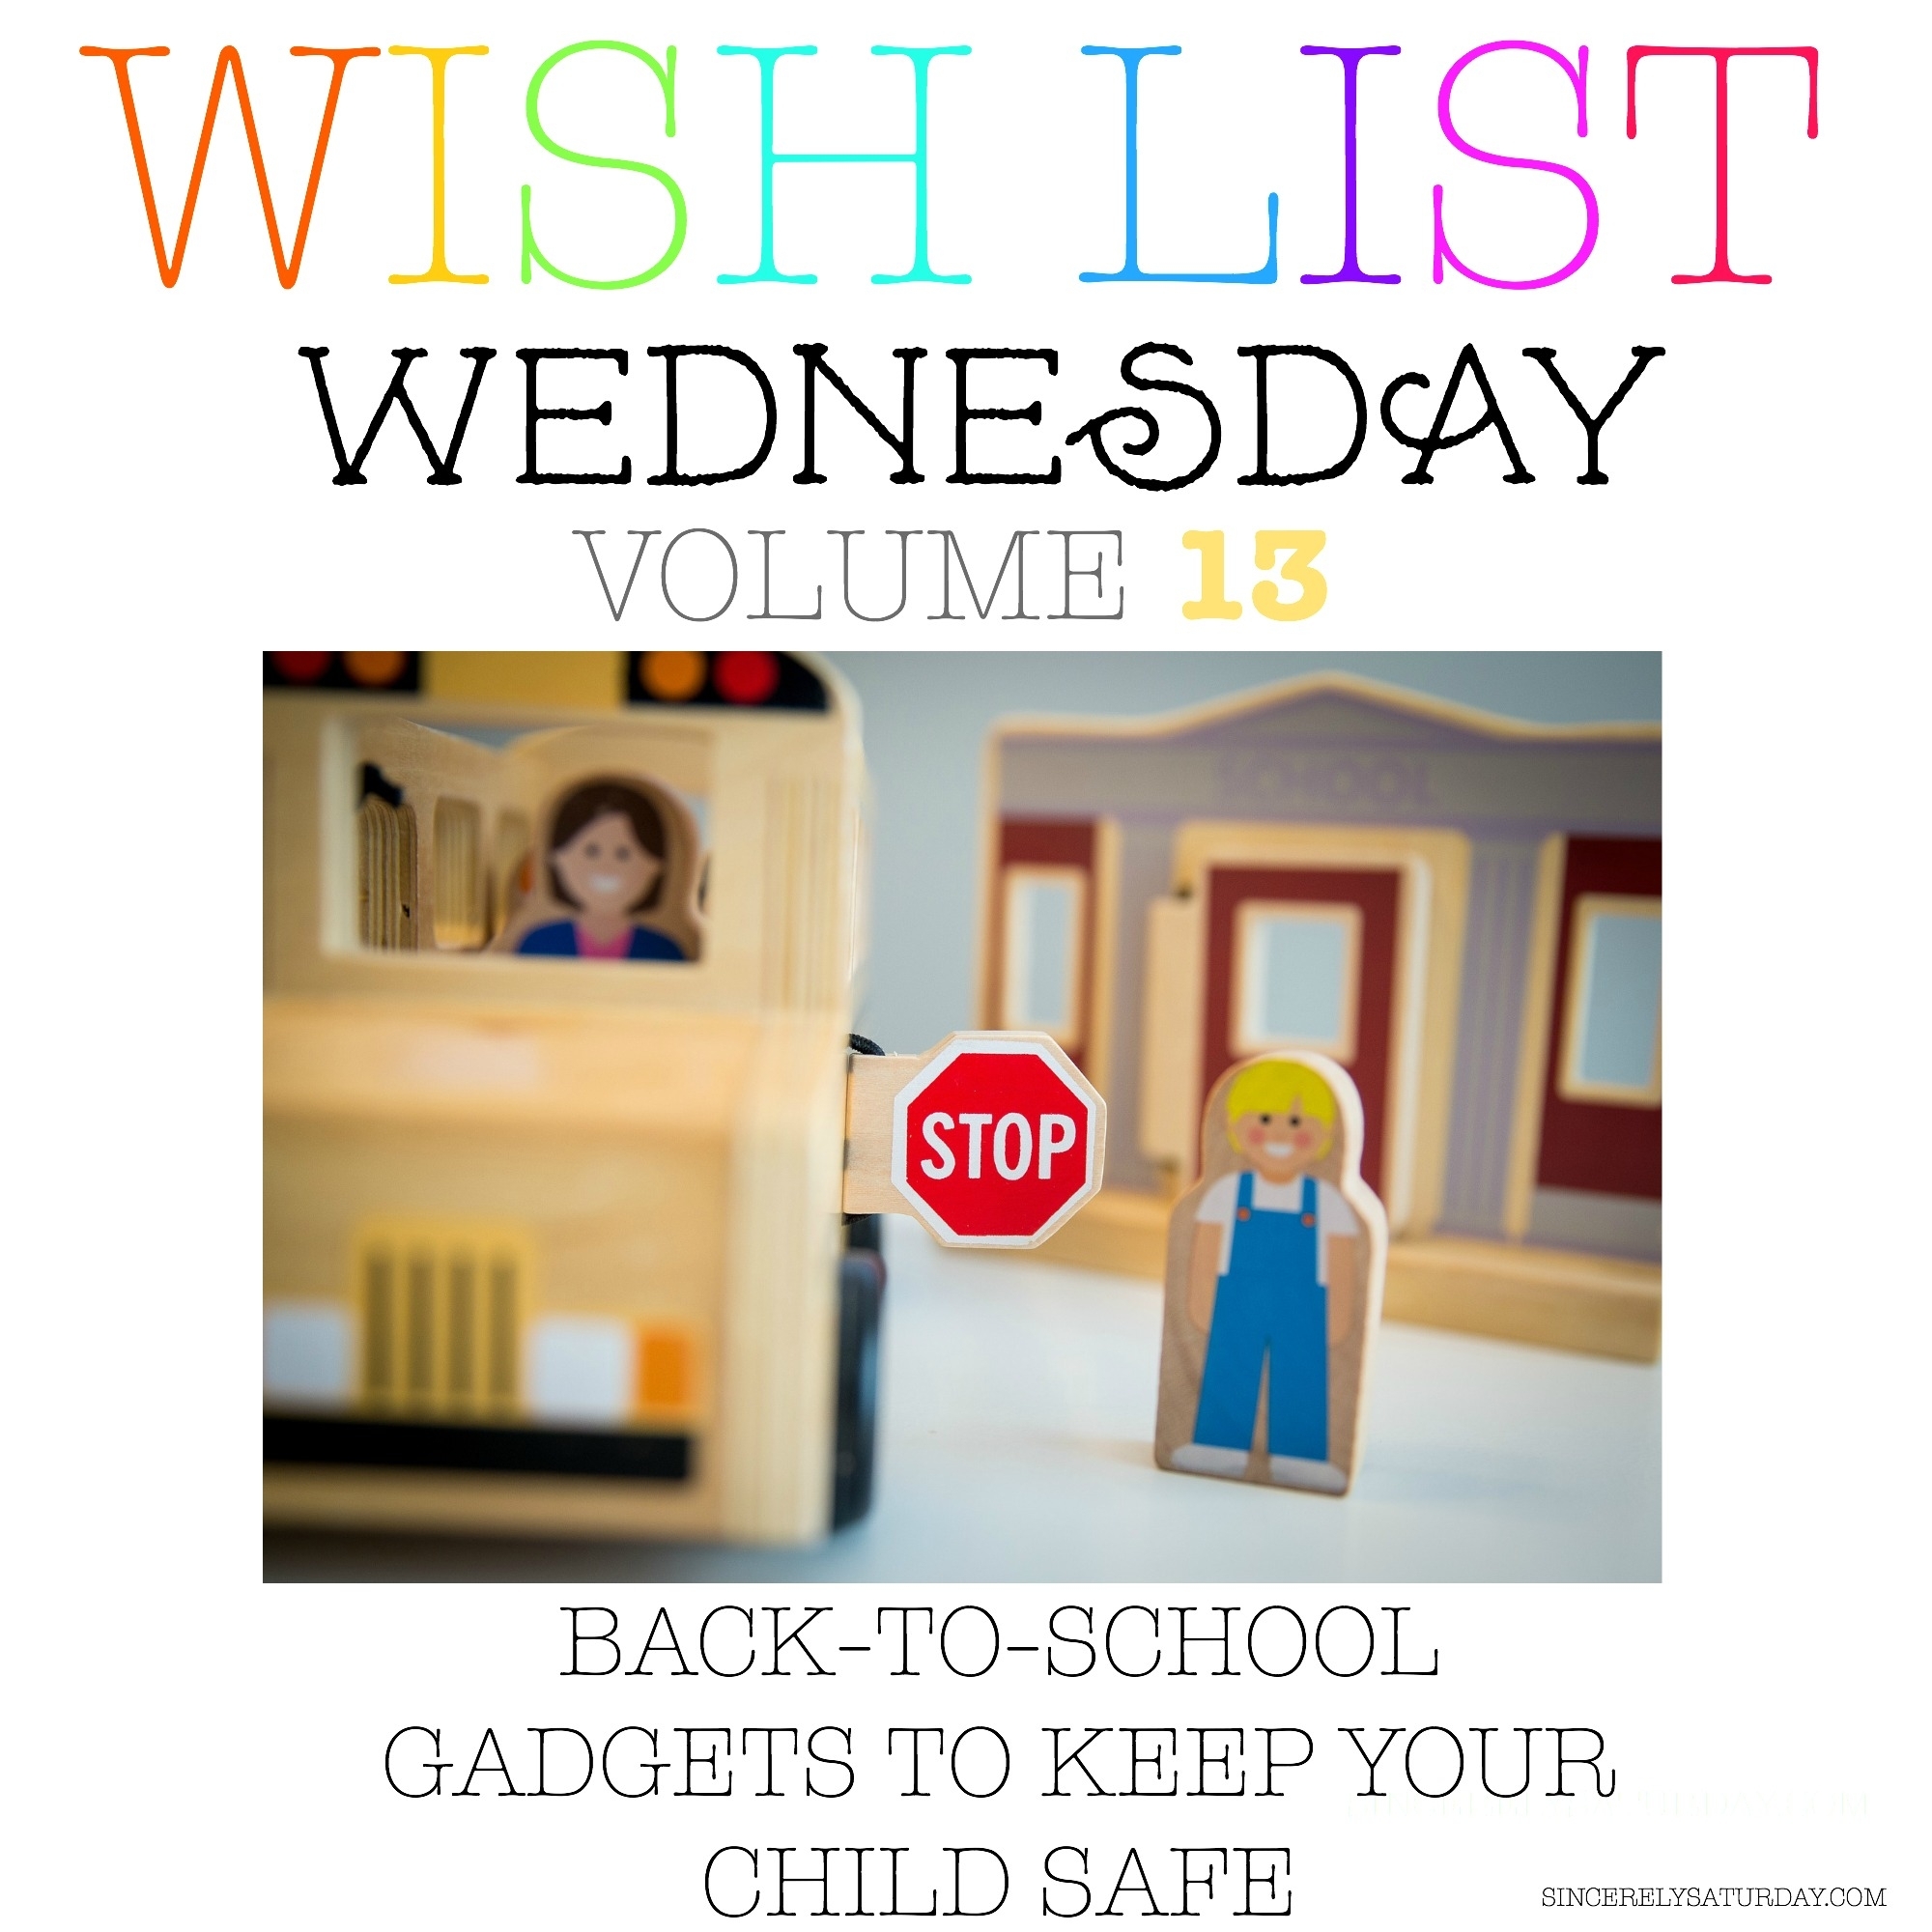 Back-to-school gadgets to keep your child safe